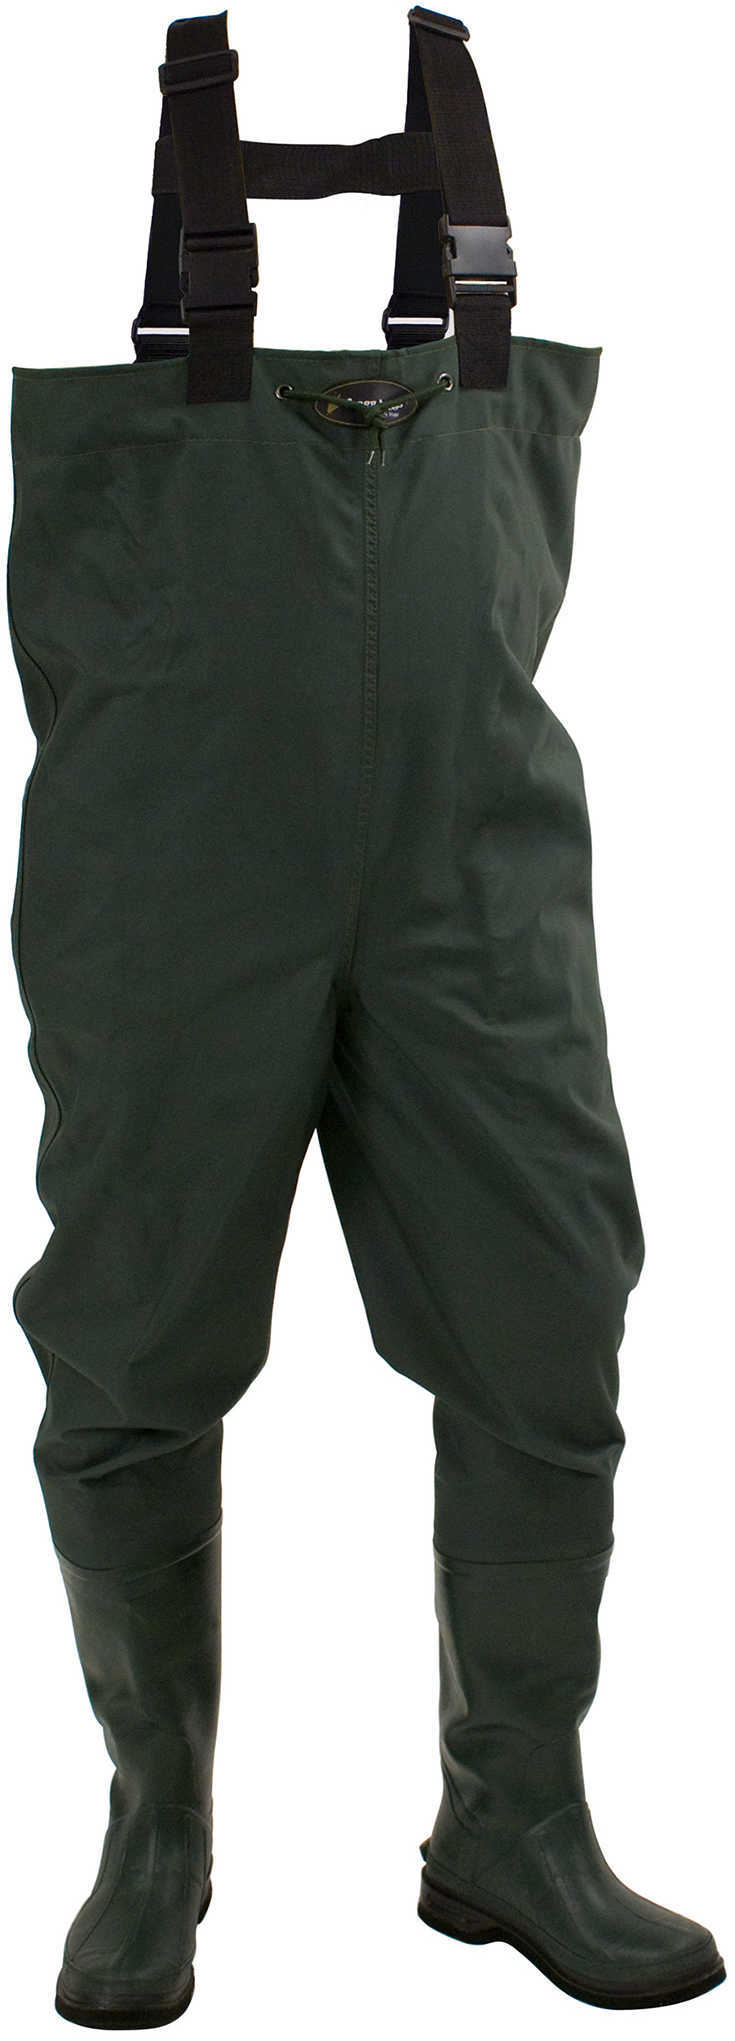 Frogg Toggs Wader Forest Green Cleated Size 11 271524311